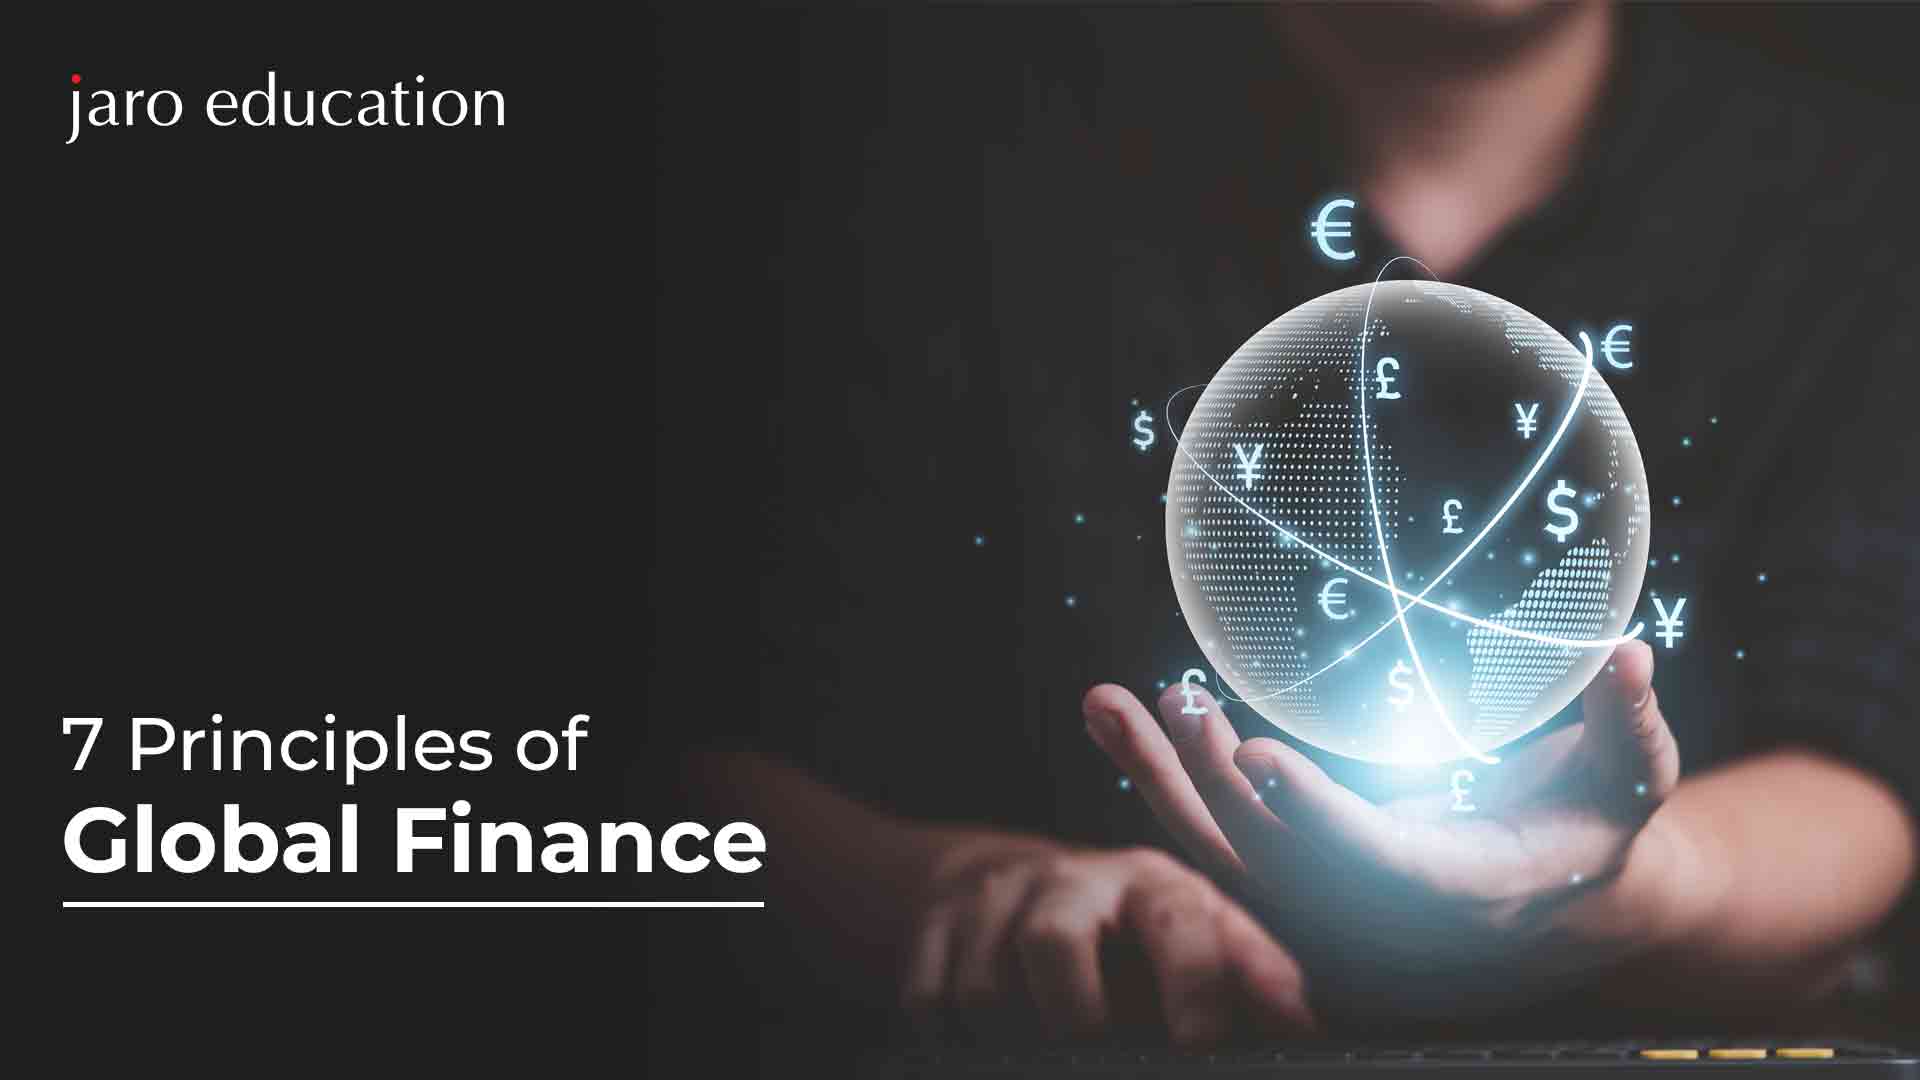 Significance of Financial Education